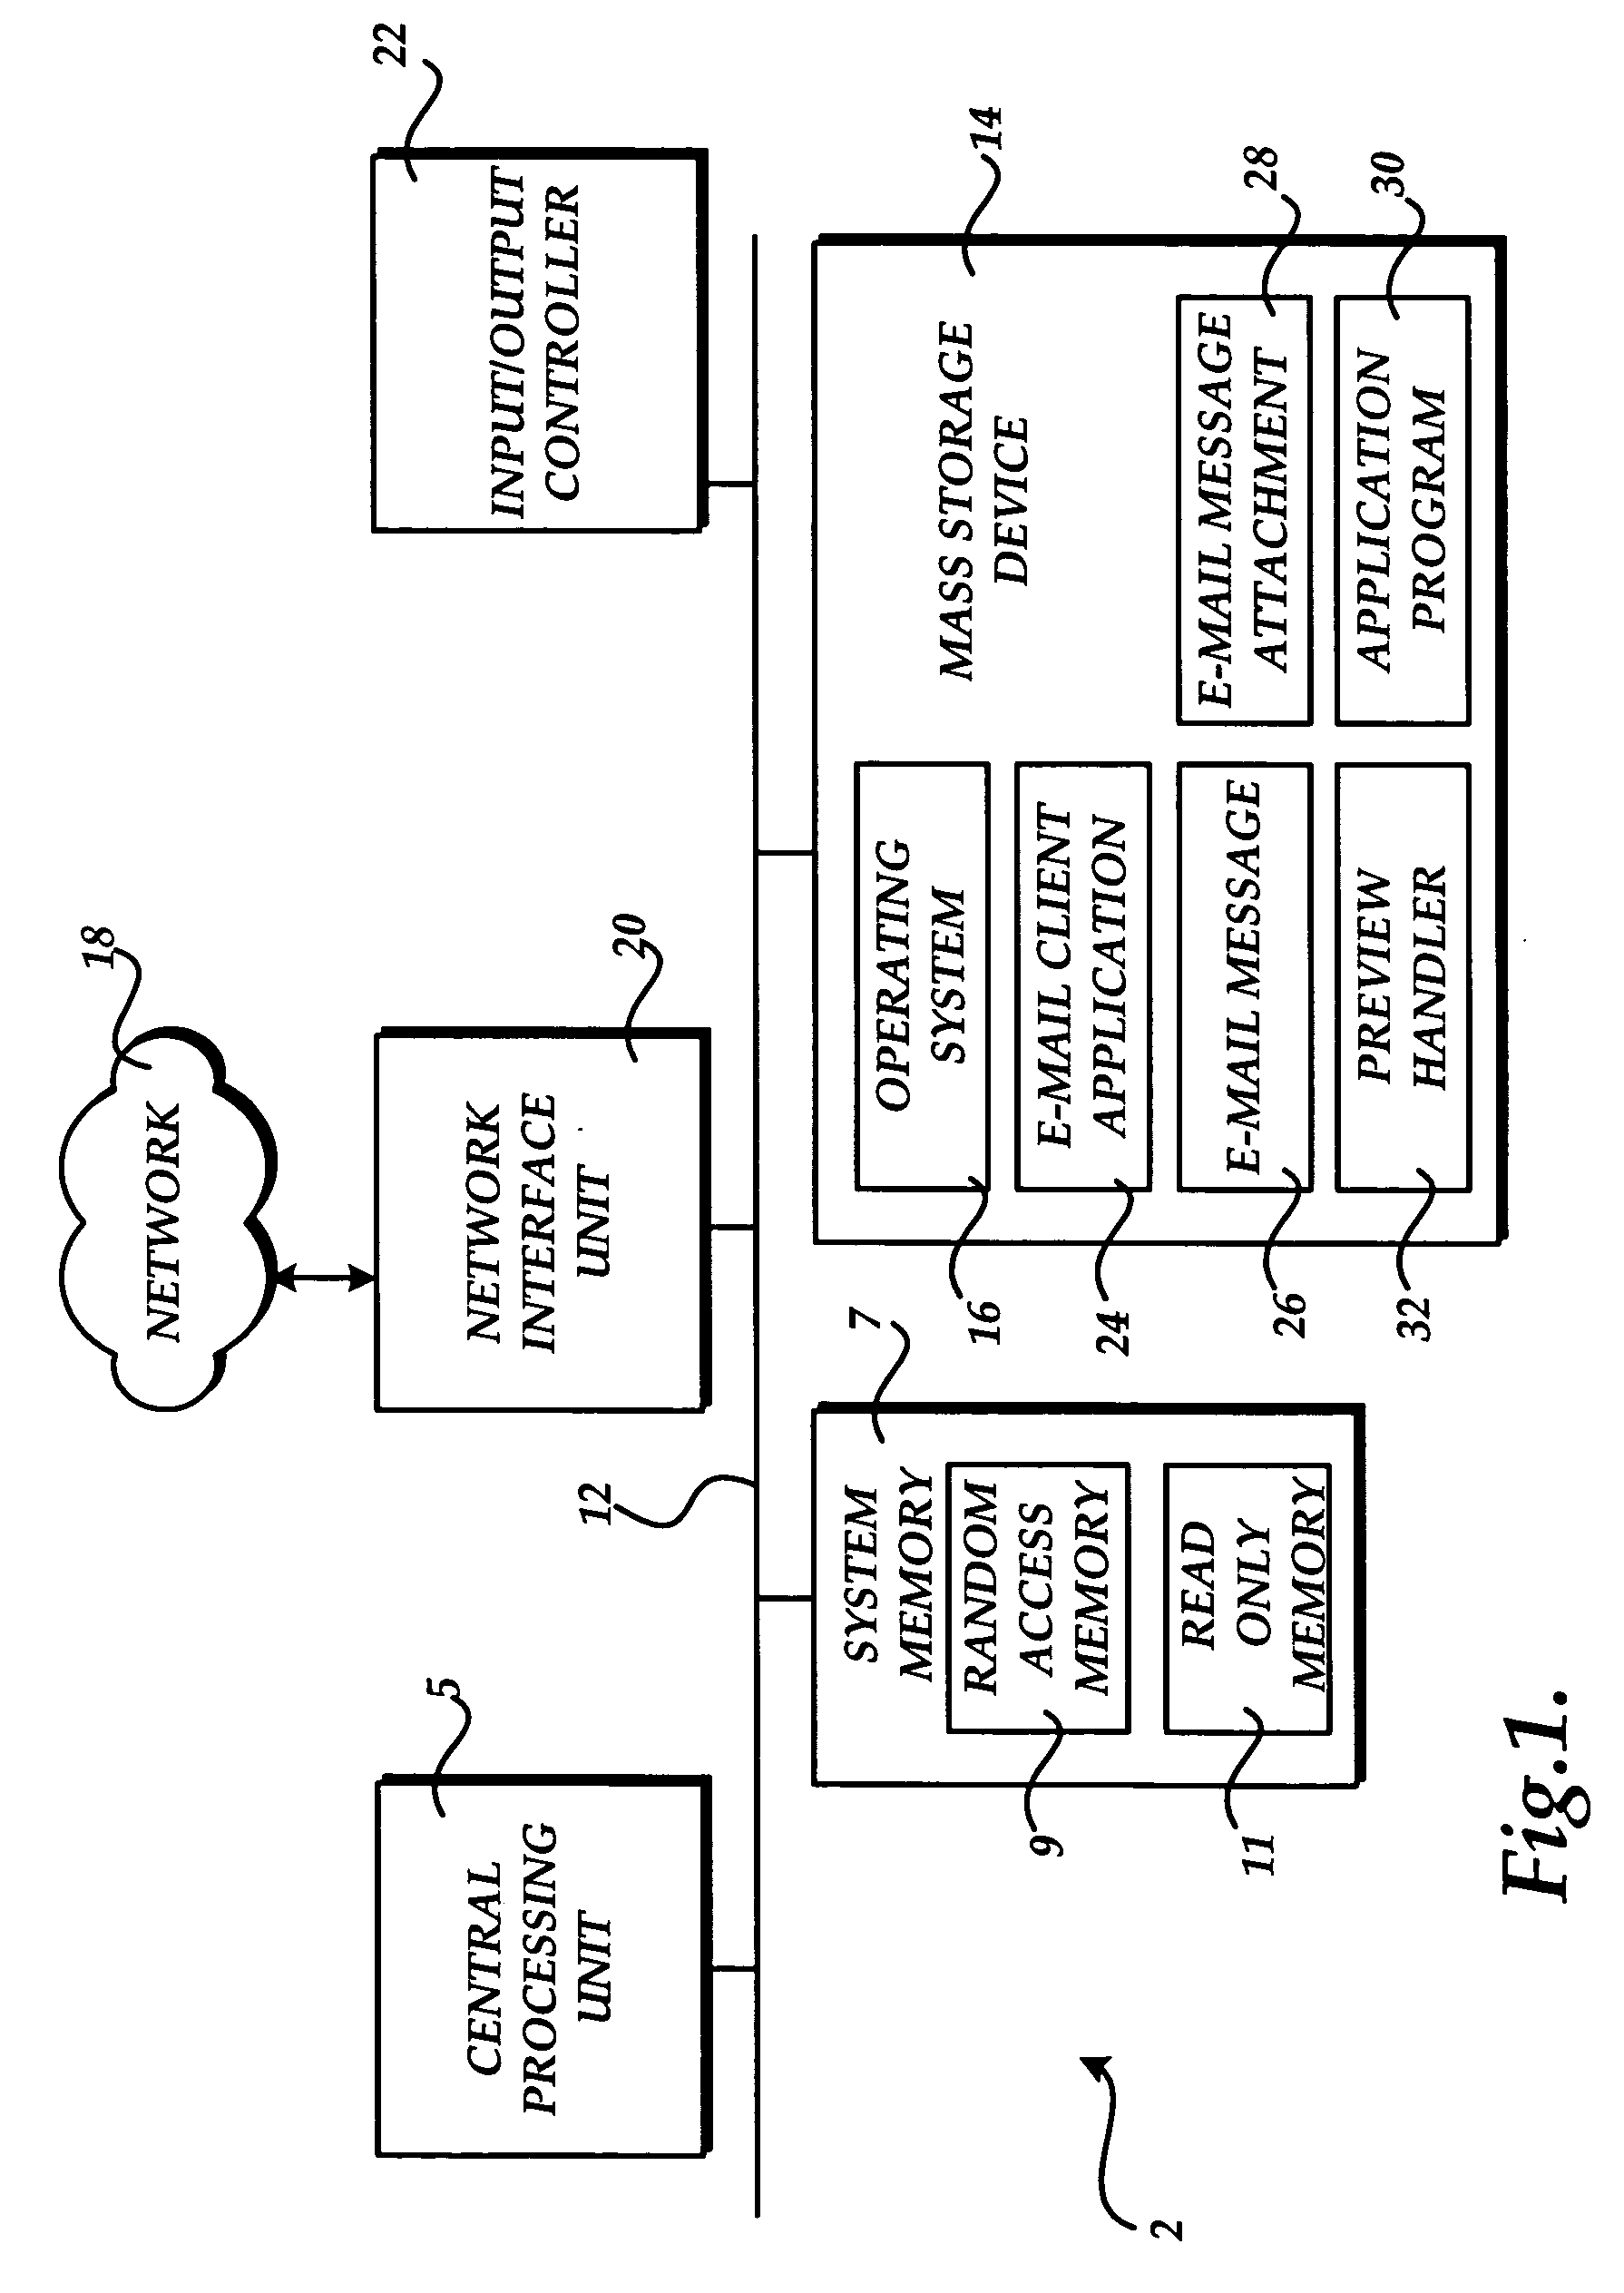 Method and computer-readable medium for previewing and performing actions on attachments to electronic mail messages